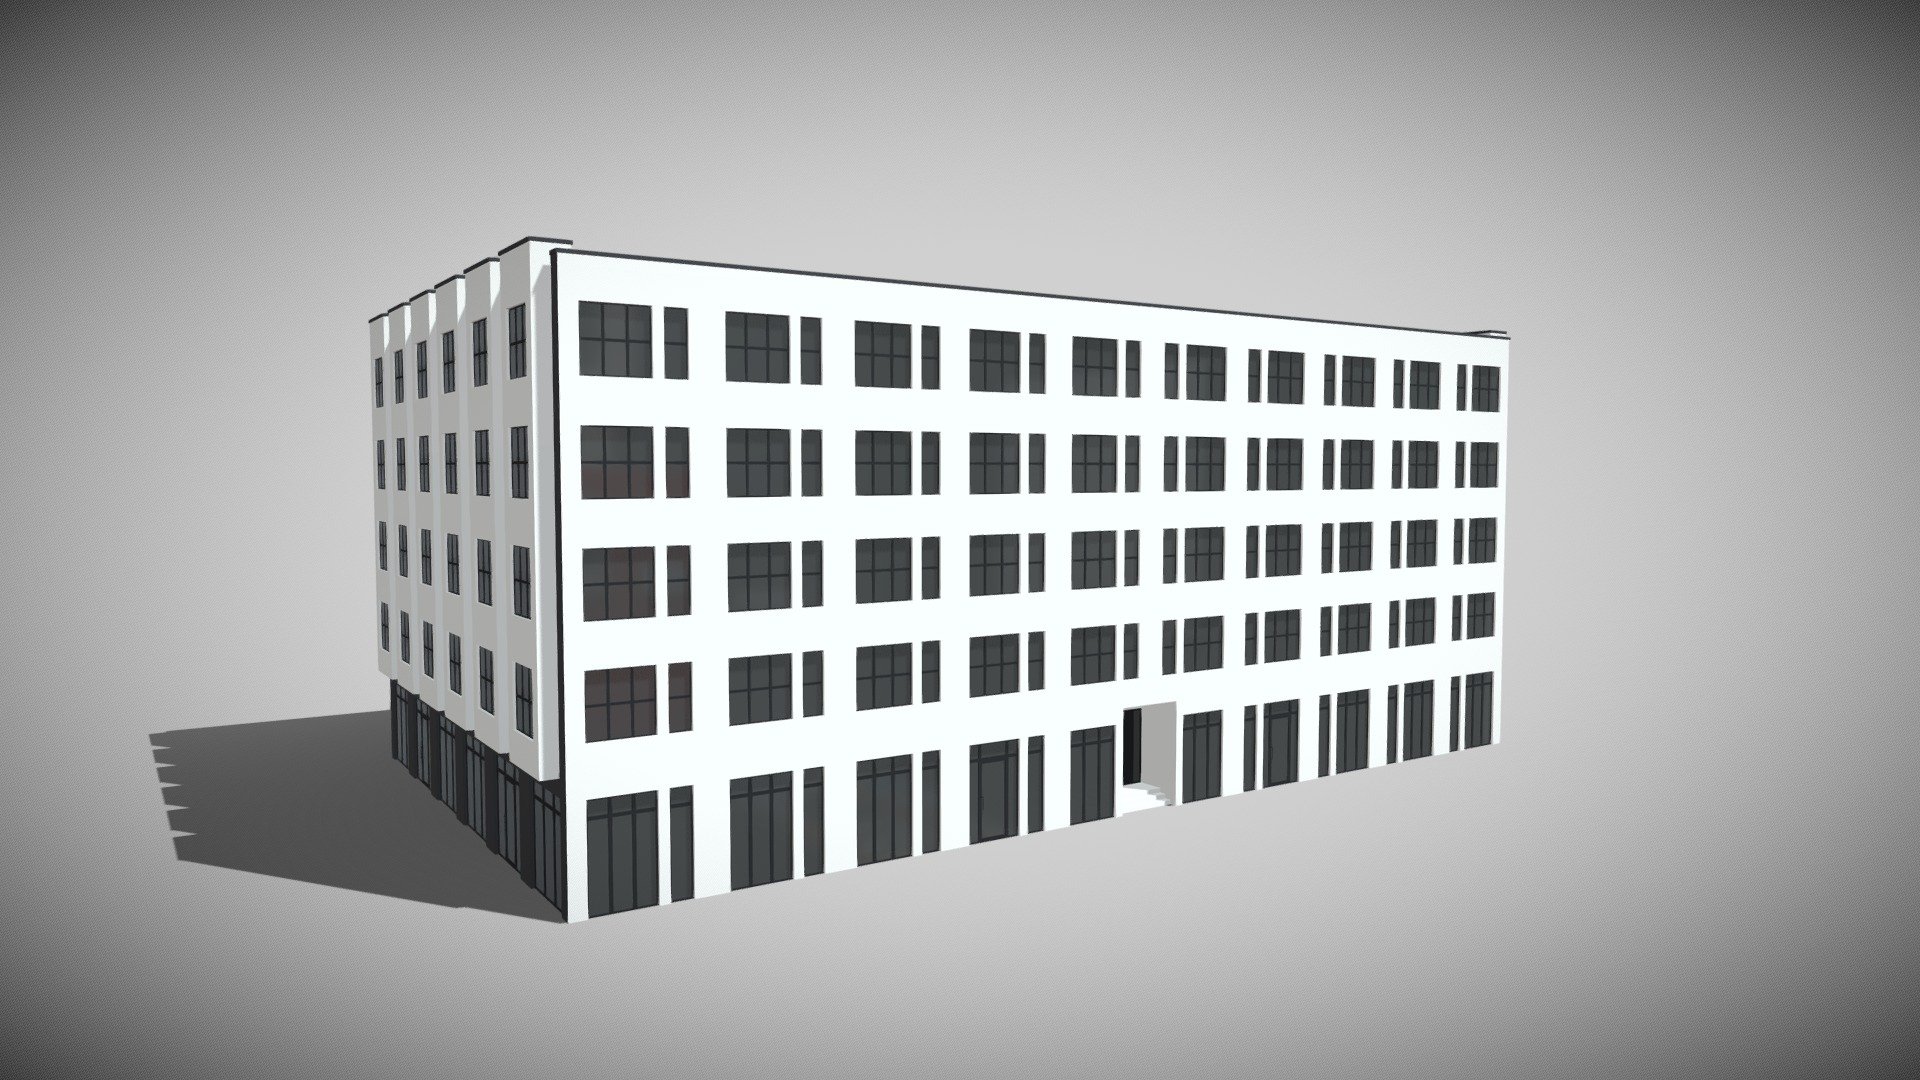 Detailed model of an Apartment Building with no interior, modeled in Cinema 4D.The model was created using approximate real world dimensions.

The model has 19,876 polys and 23,714 vertices.

An additional file has been provided containing the original Cinema 4D project files and other 3d export files such as 3ds, fbx and obj 3d model